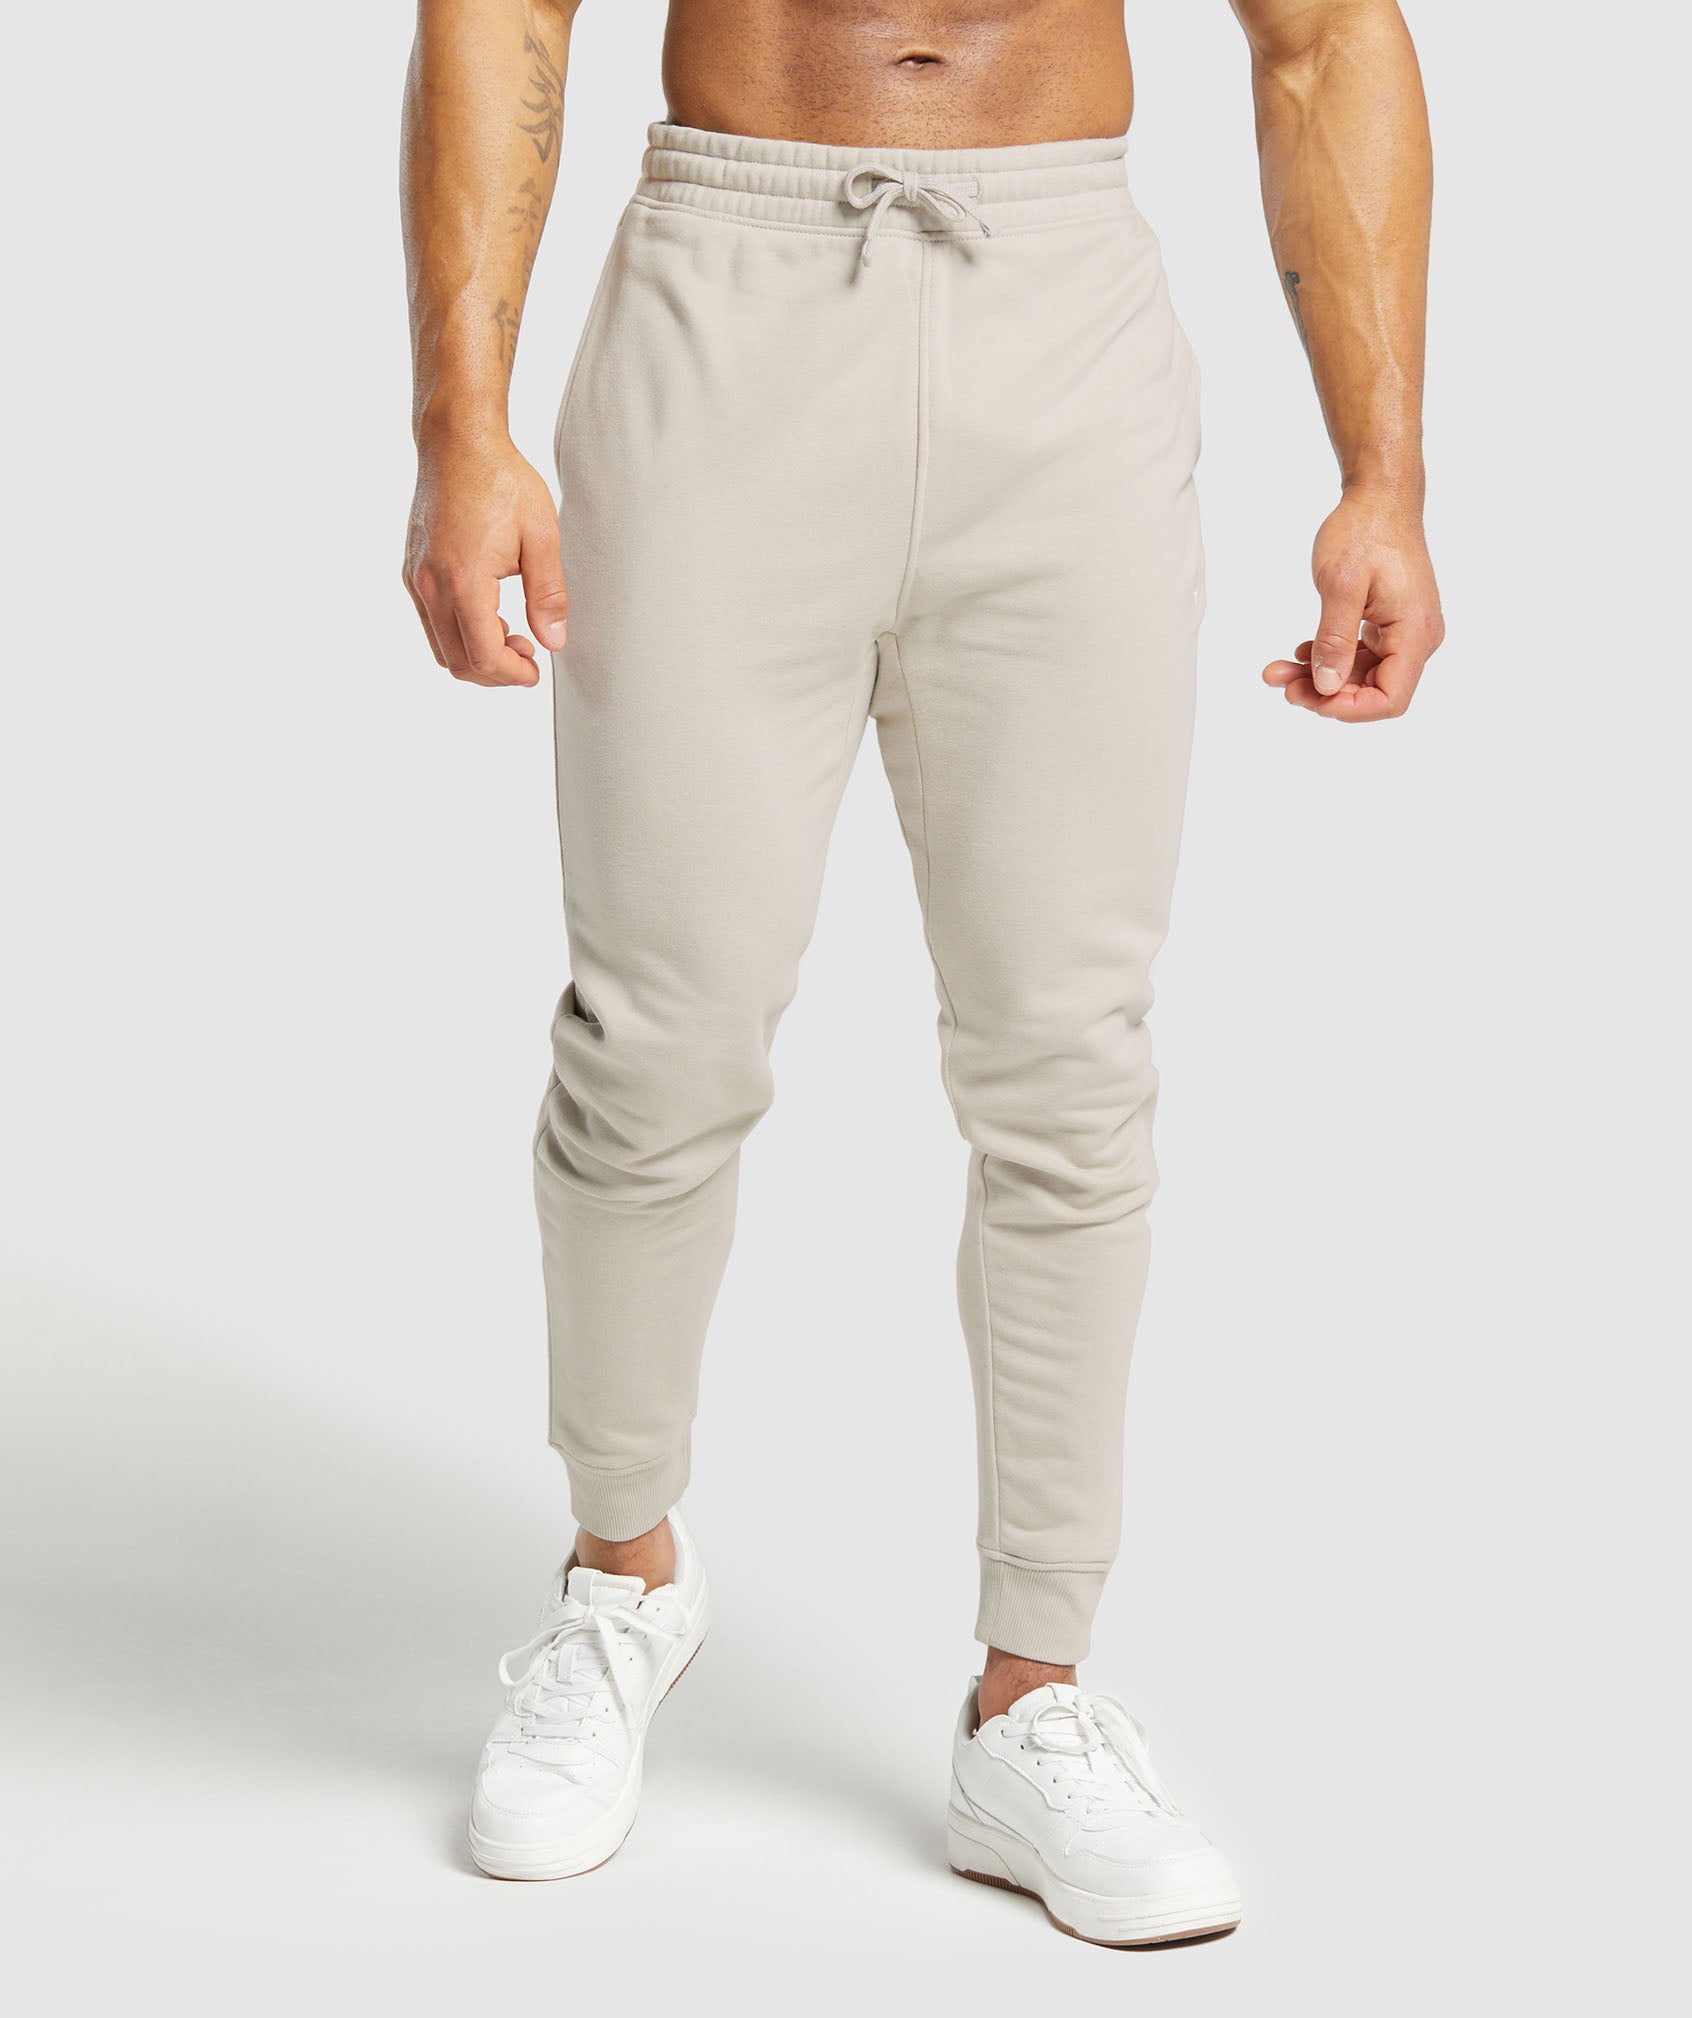 Crest Joggers in Pebble Grey - view 1